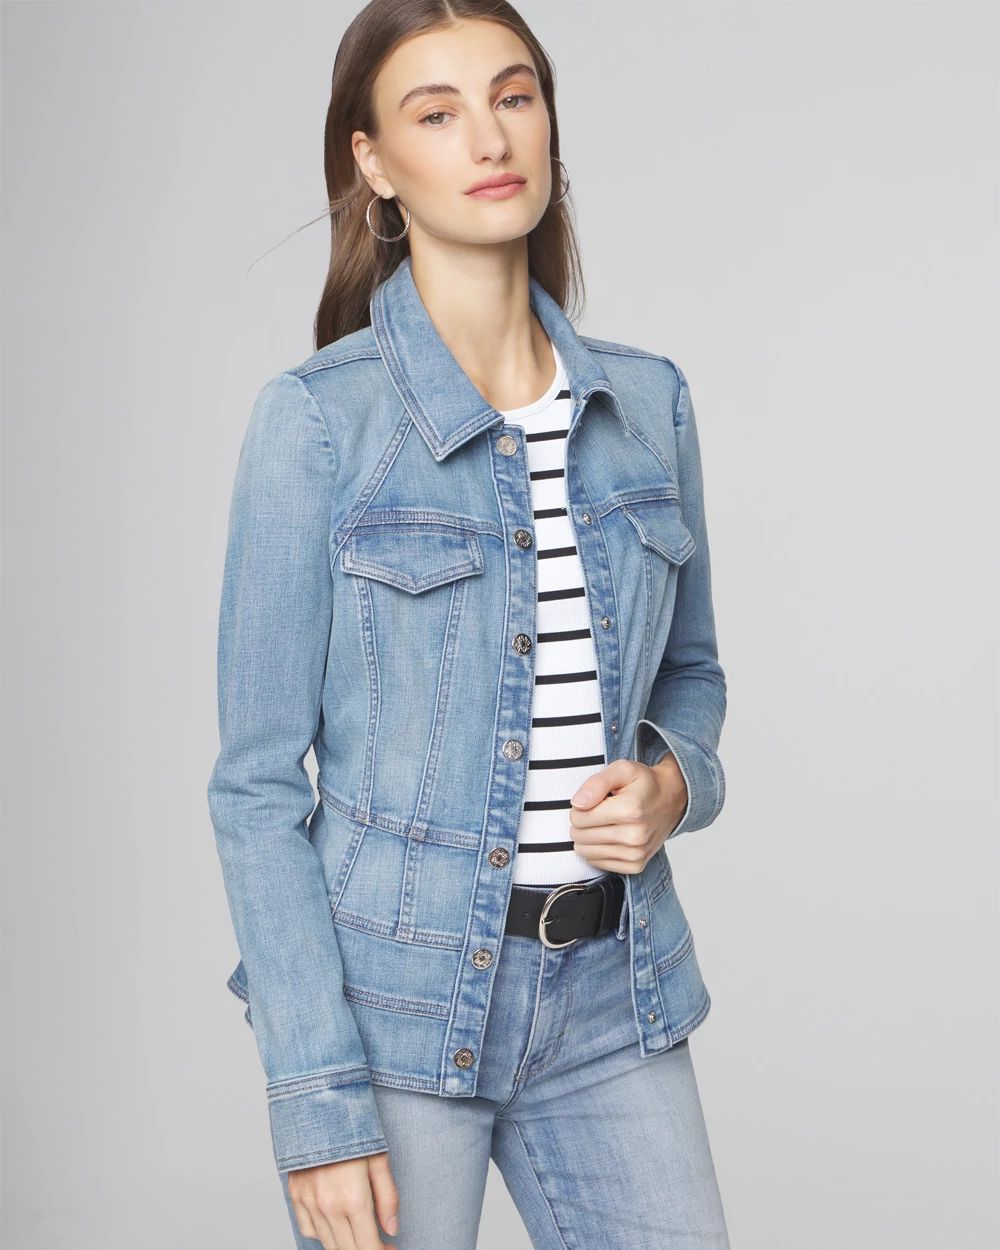 Petite Seamed Denim Jacket click to view larger image.